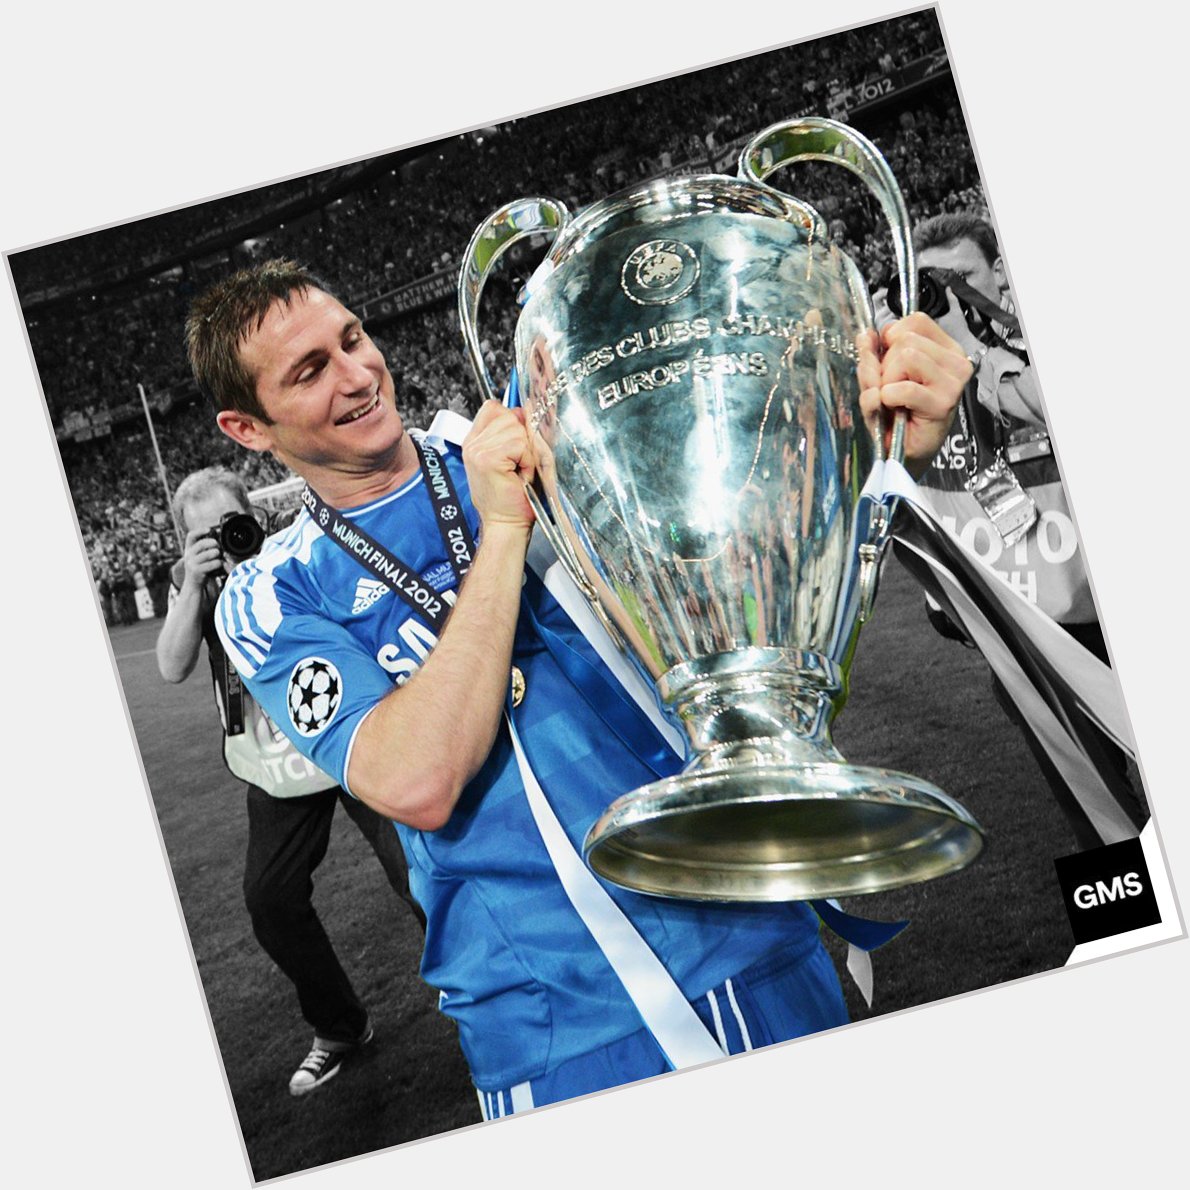  648 games 211 goals 13 trophies Chelsea\s greatest ever player

Happy birthday, Frank Lampard  